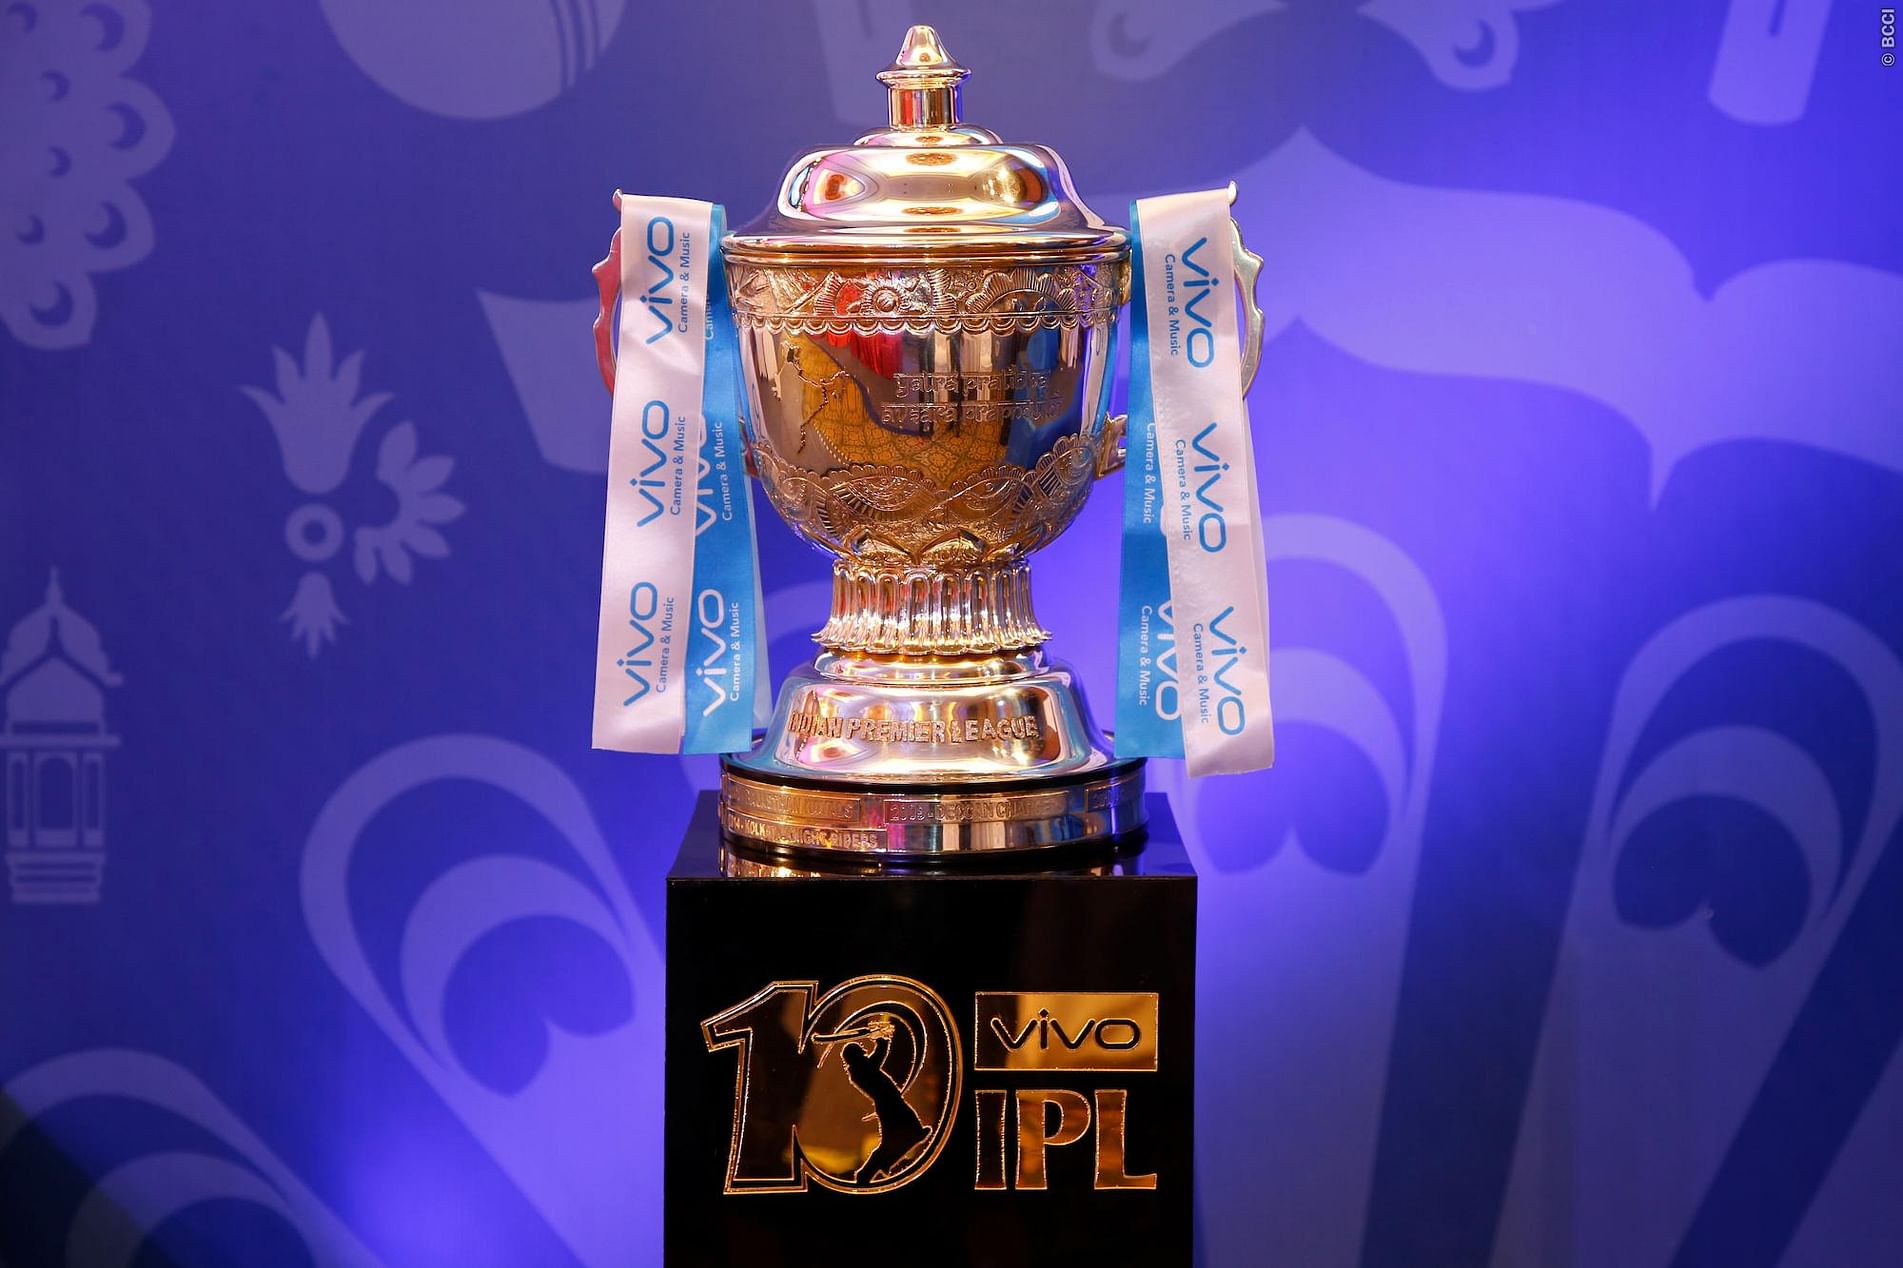 BCCI has suspended the IPL 2021 amid cases of COVID-19 | AFP